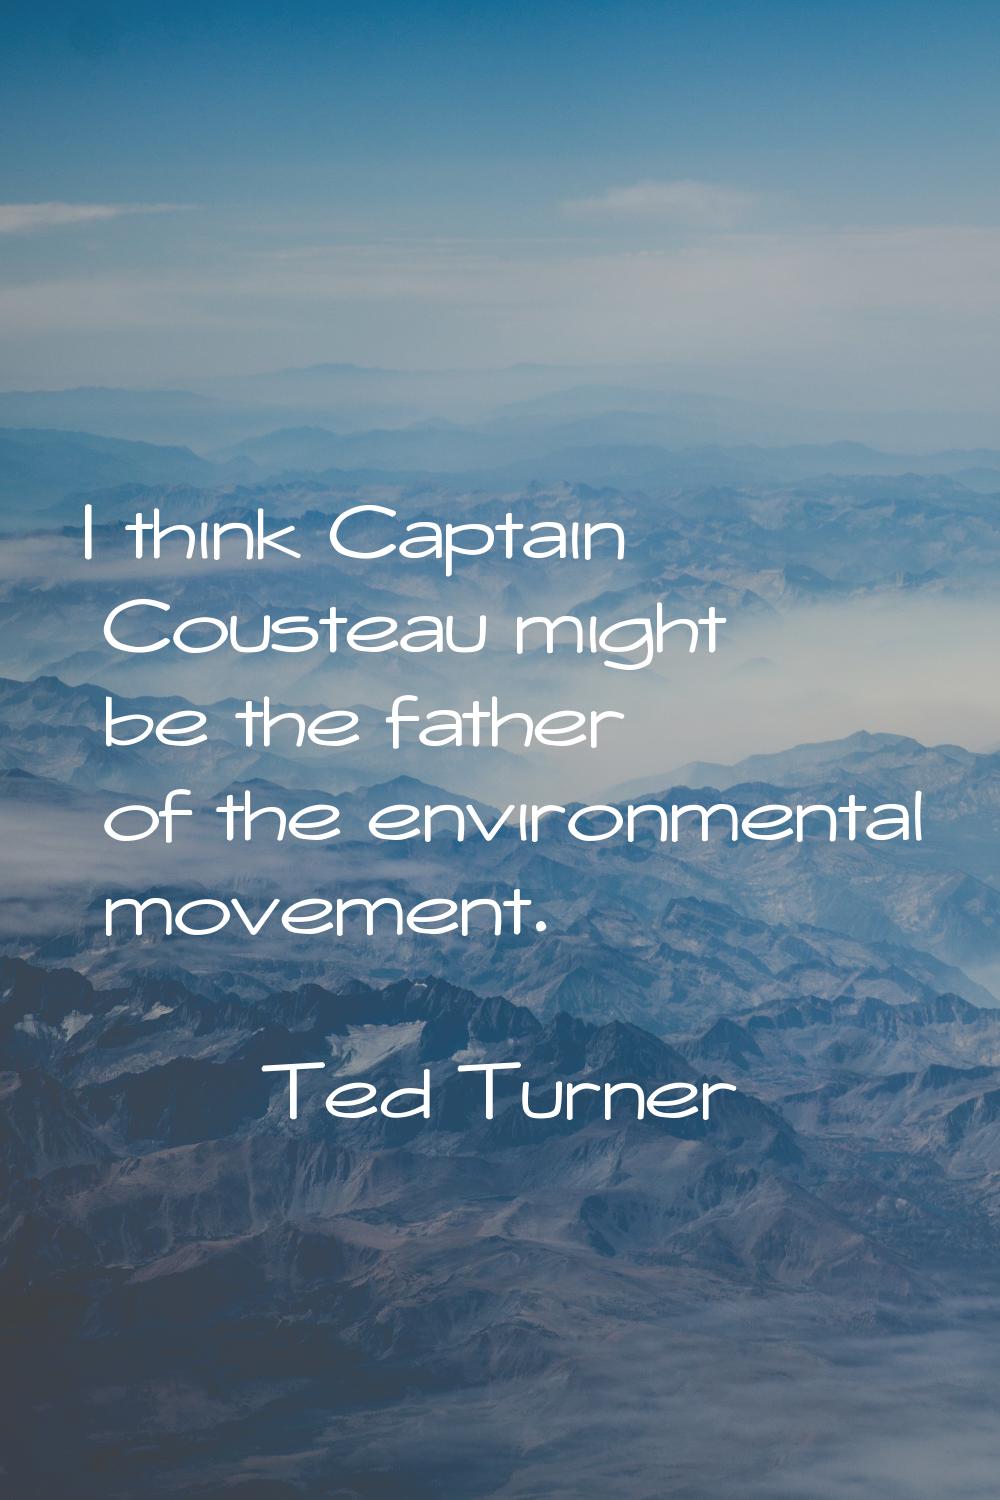 I think Captain Cousteau might be the father of the environmental movement.